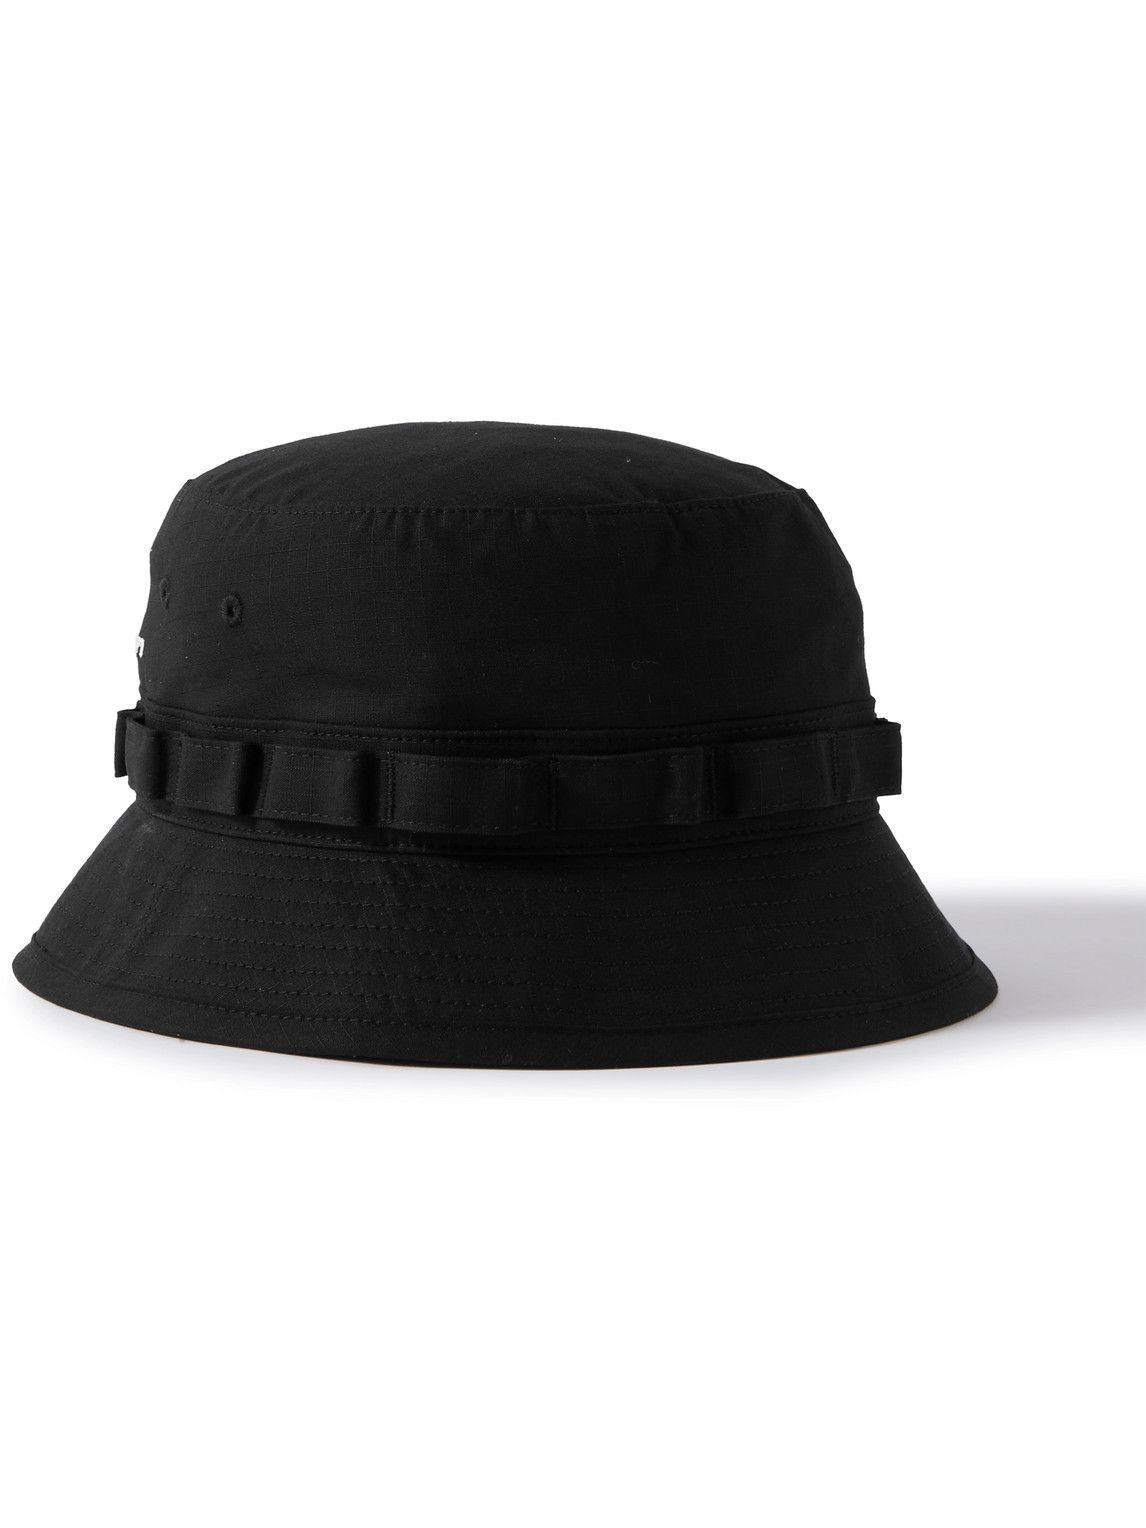 WTAPS - Jungle 02 Logo-Embroidered Cotton-Ripstop Bucket Hat 